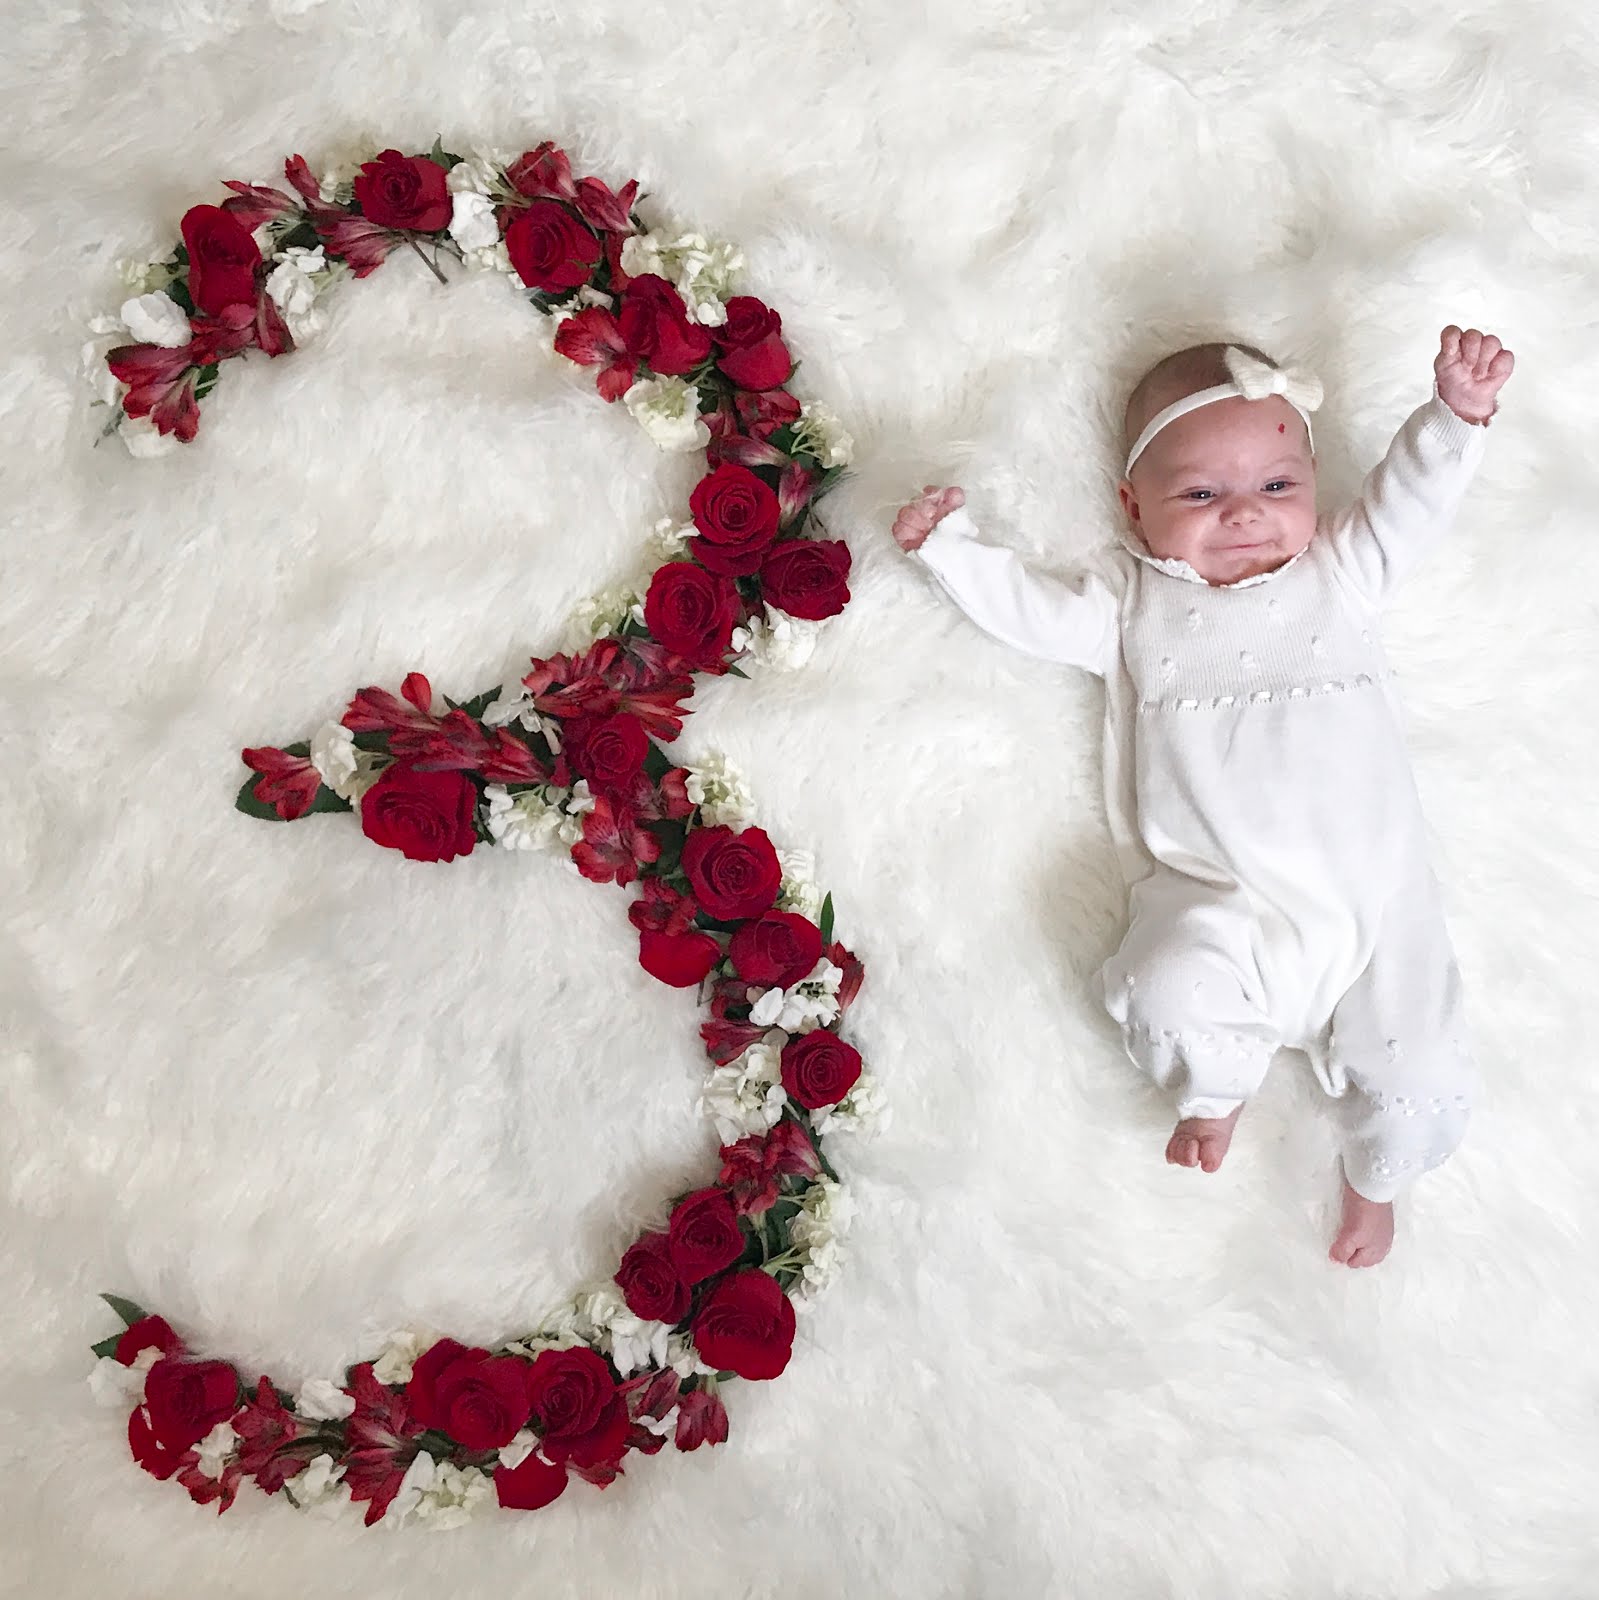 Kati Heifner: Monthly Baby Photos with Flowers